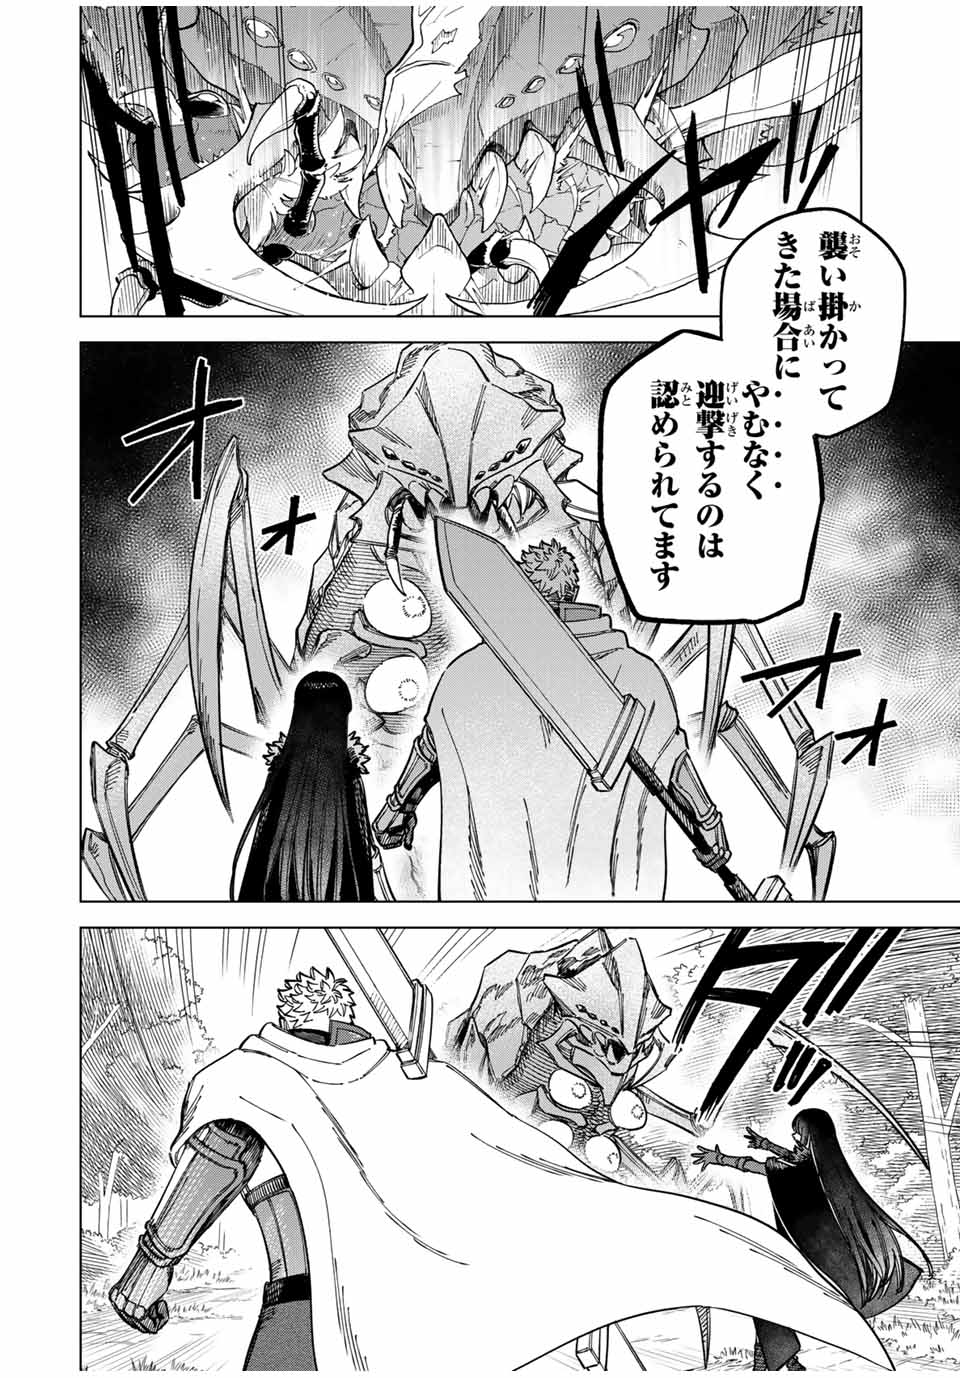 Witch and Mercenary 魔女と傭兵 第9.5話 - Page 3